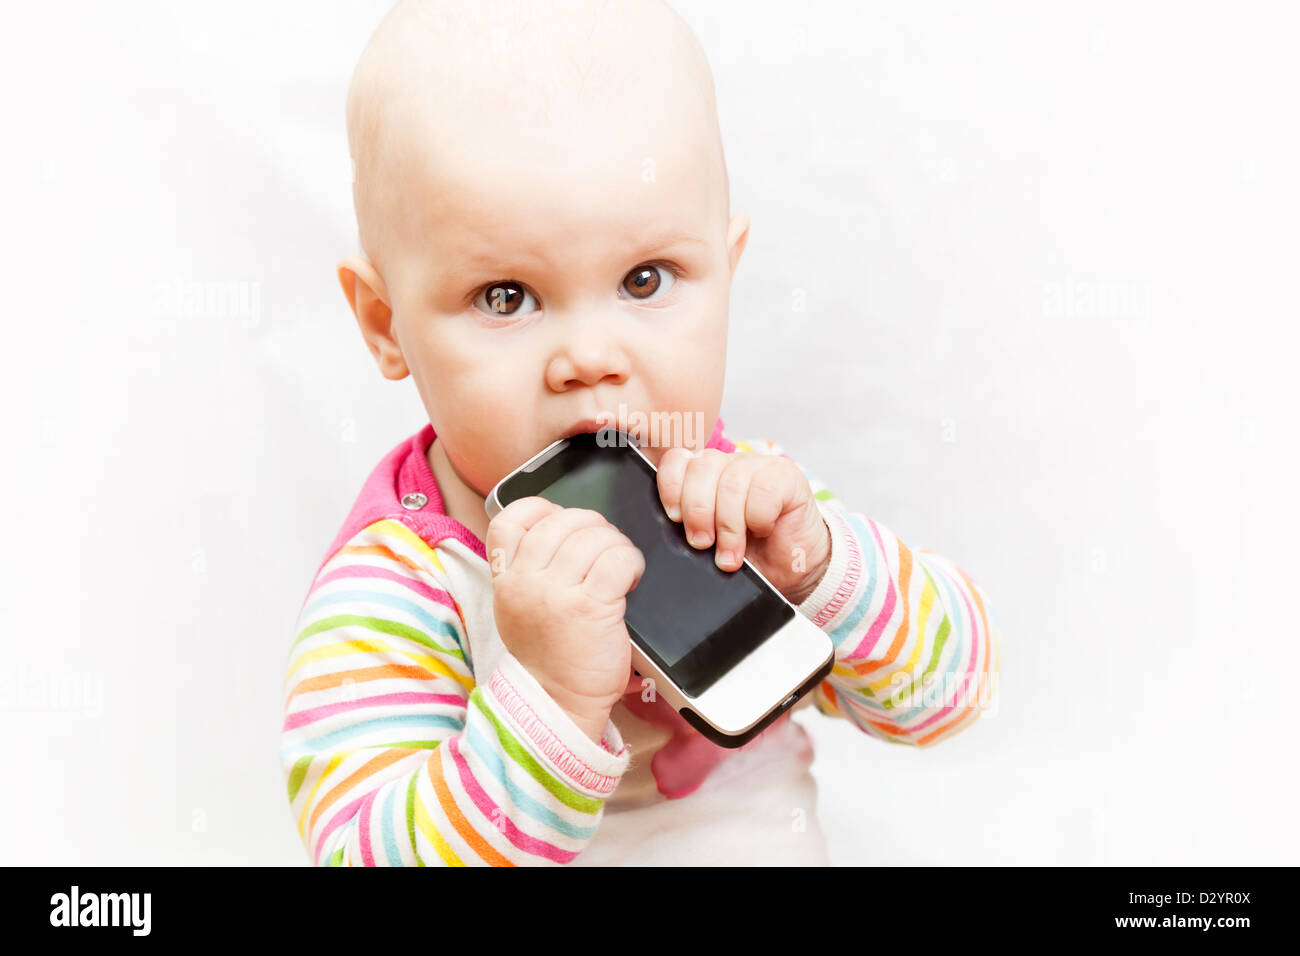 little baby baby chews on a mobile phone in colorful clothing Stock Photo